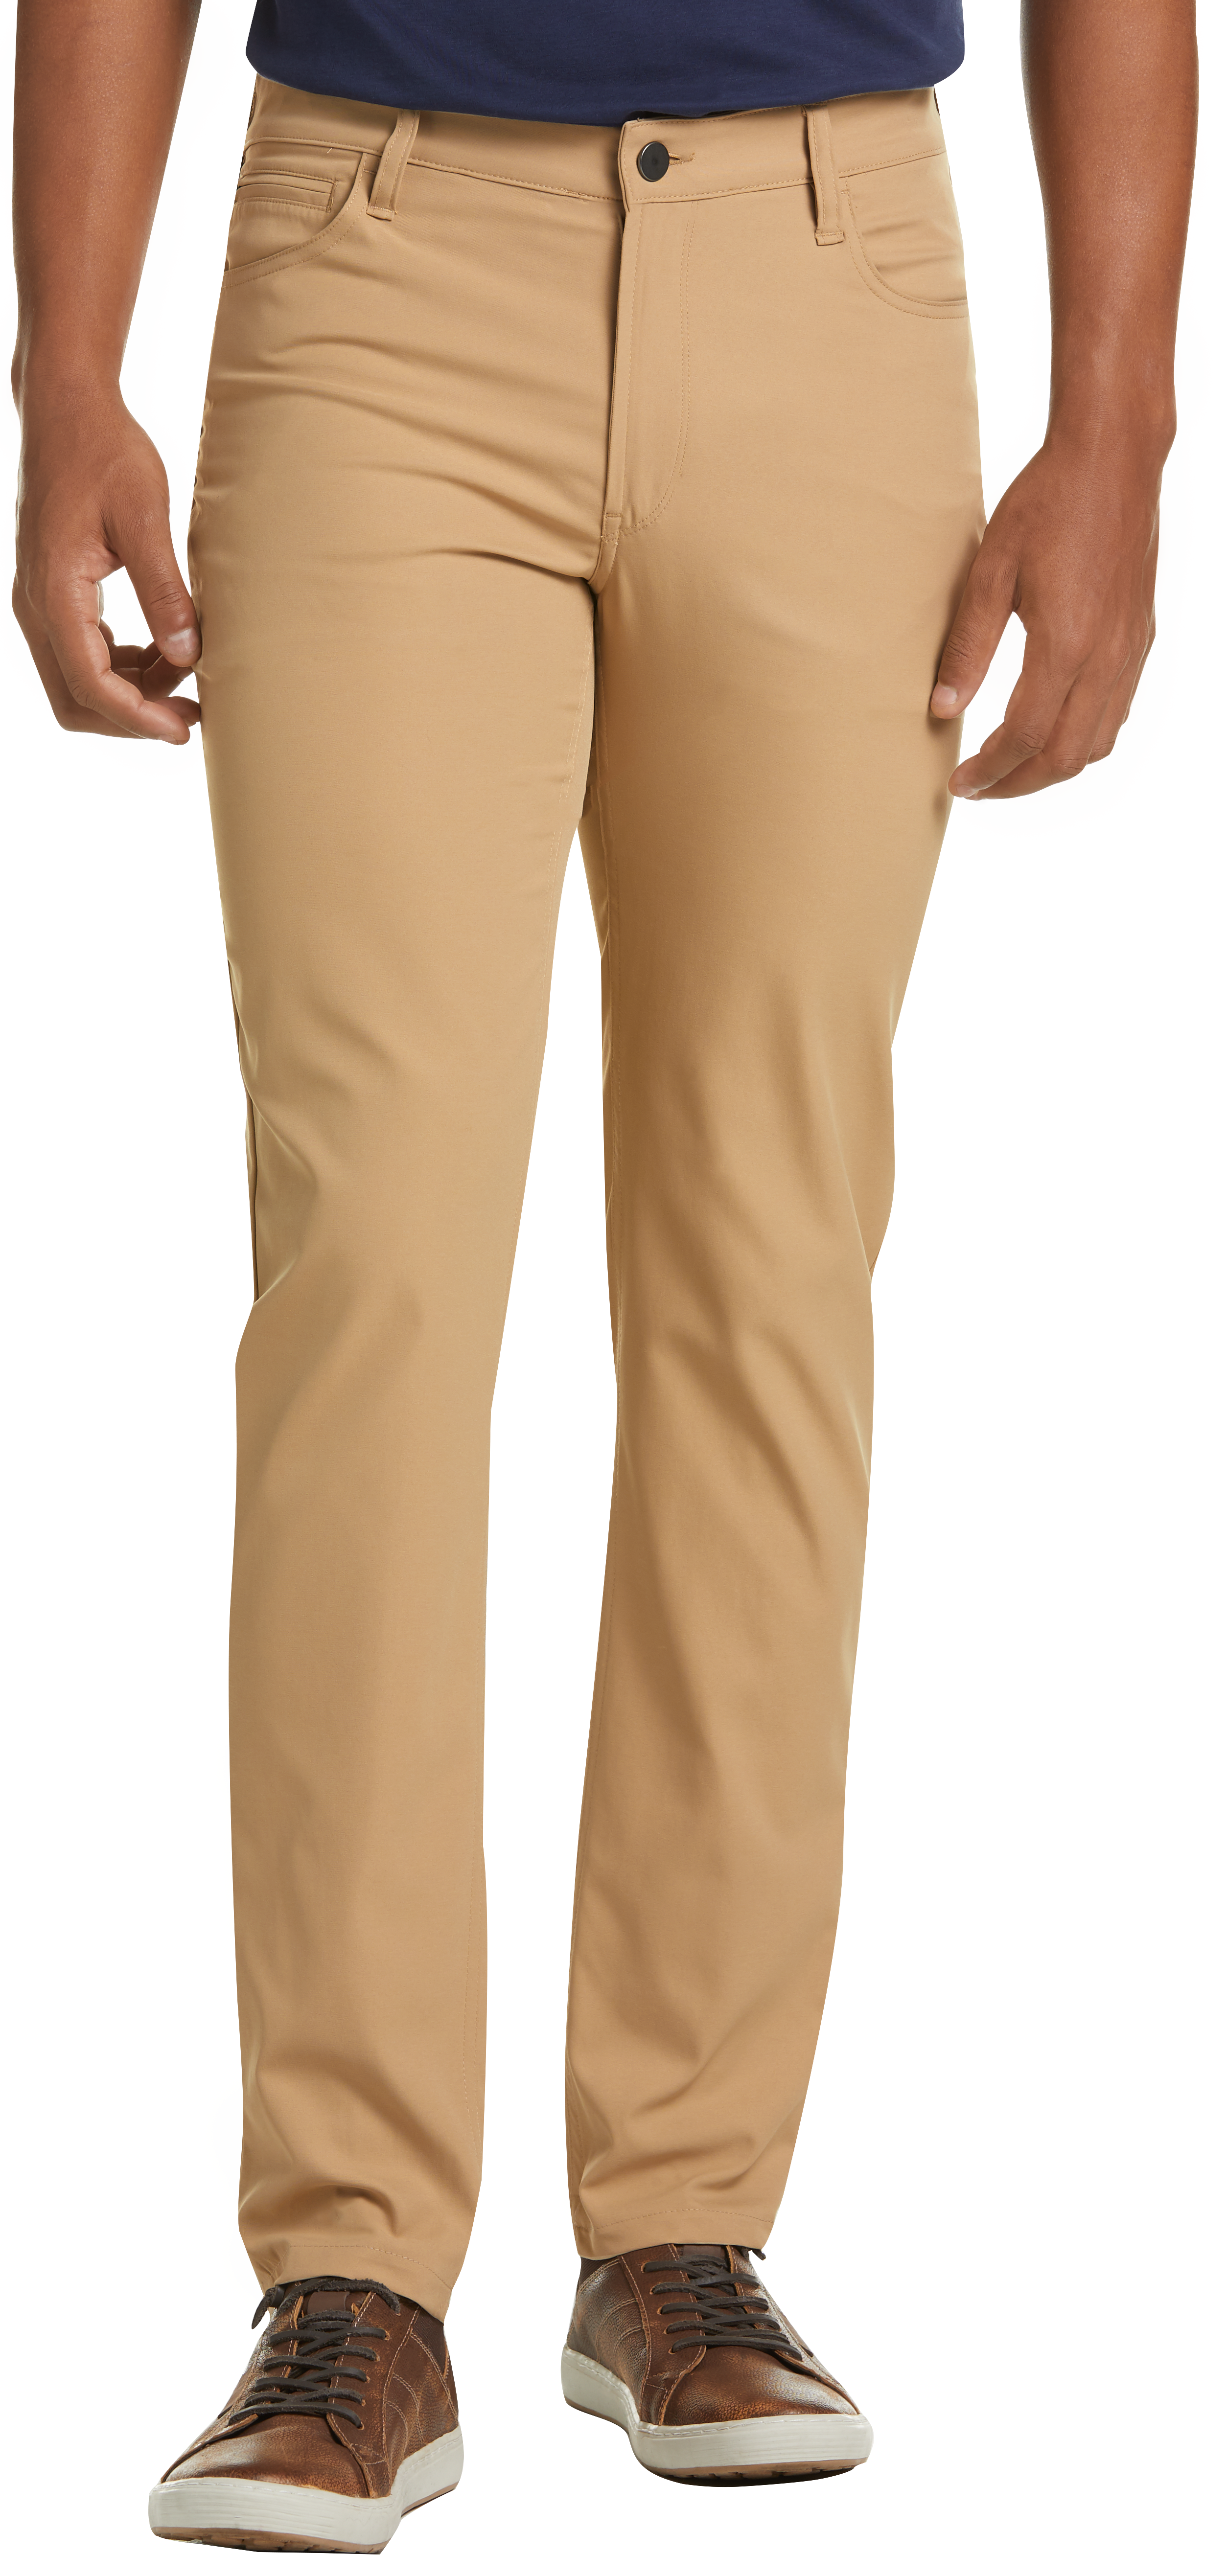 Awearness Kenneth Cole Sand Slim Fit Casual Pants - Men's Shirts | Men ...